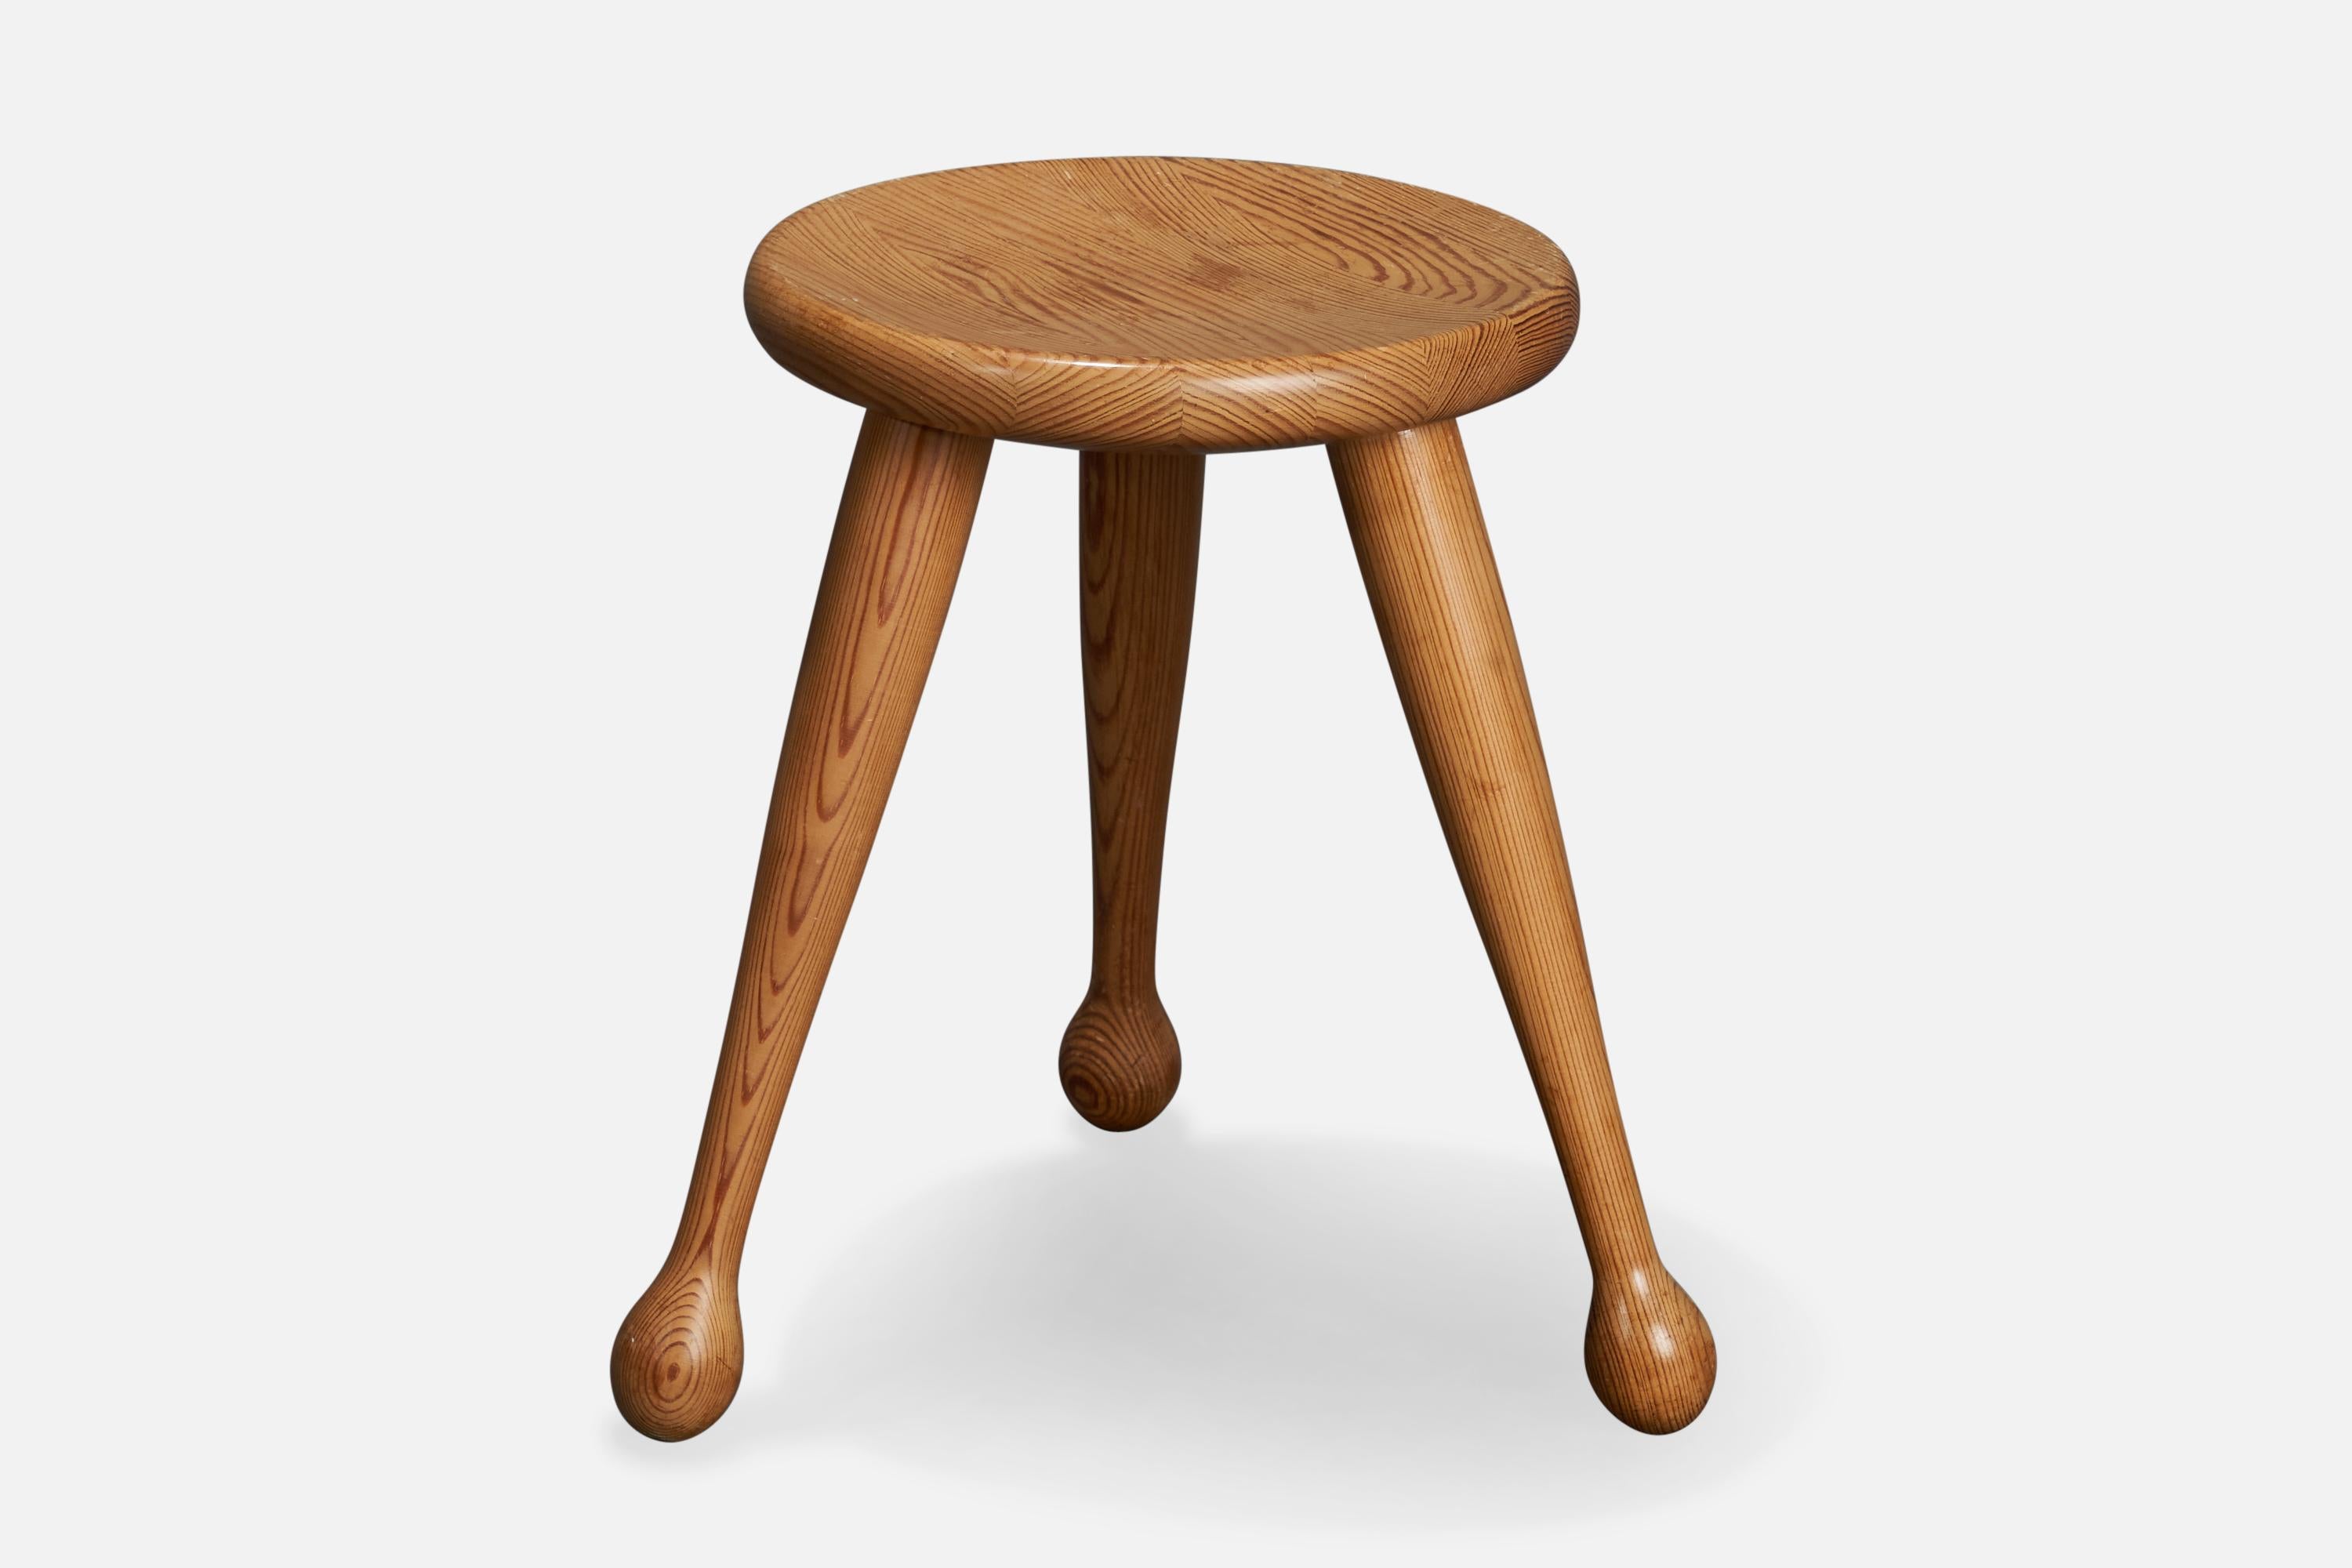 A pine stool designed and produced by Möbelkompaniet Ahl & Wallén, Sweden, 1950s.
seat height: 16.1”
seat diameter: 11.75”